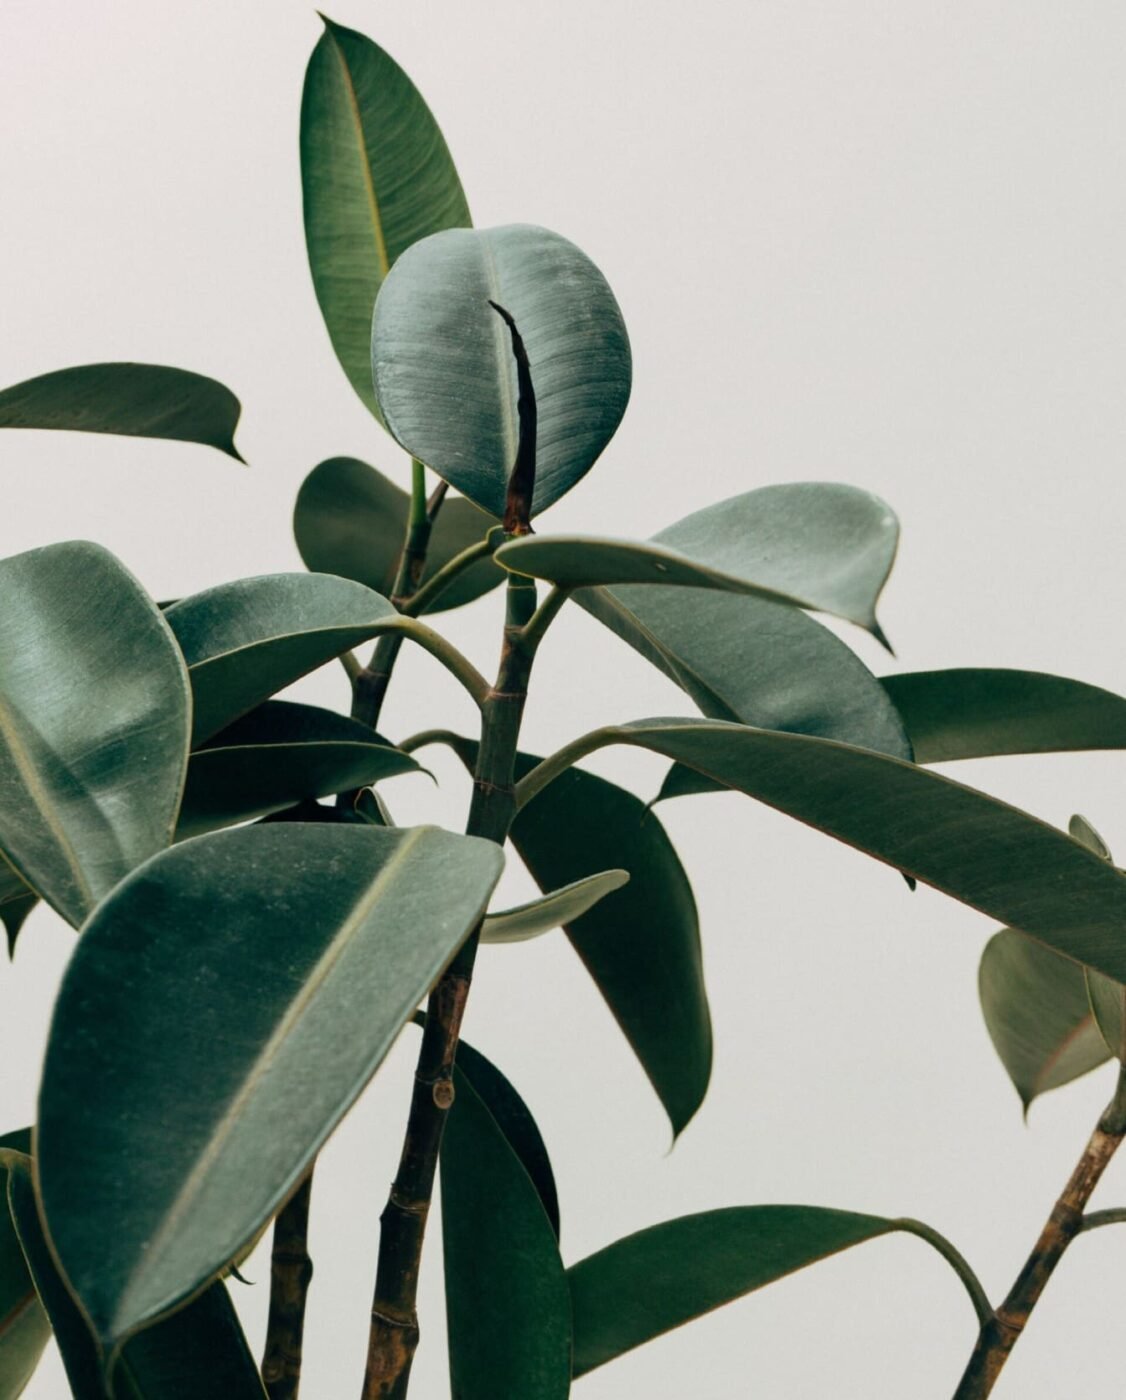 A close-up of a rubber plant with large, glossy, dark green leaves against a soft, neutral background, photographed by Fort Lauderdale arborists.